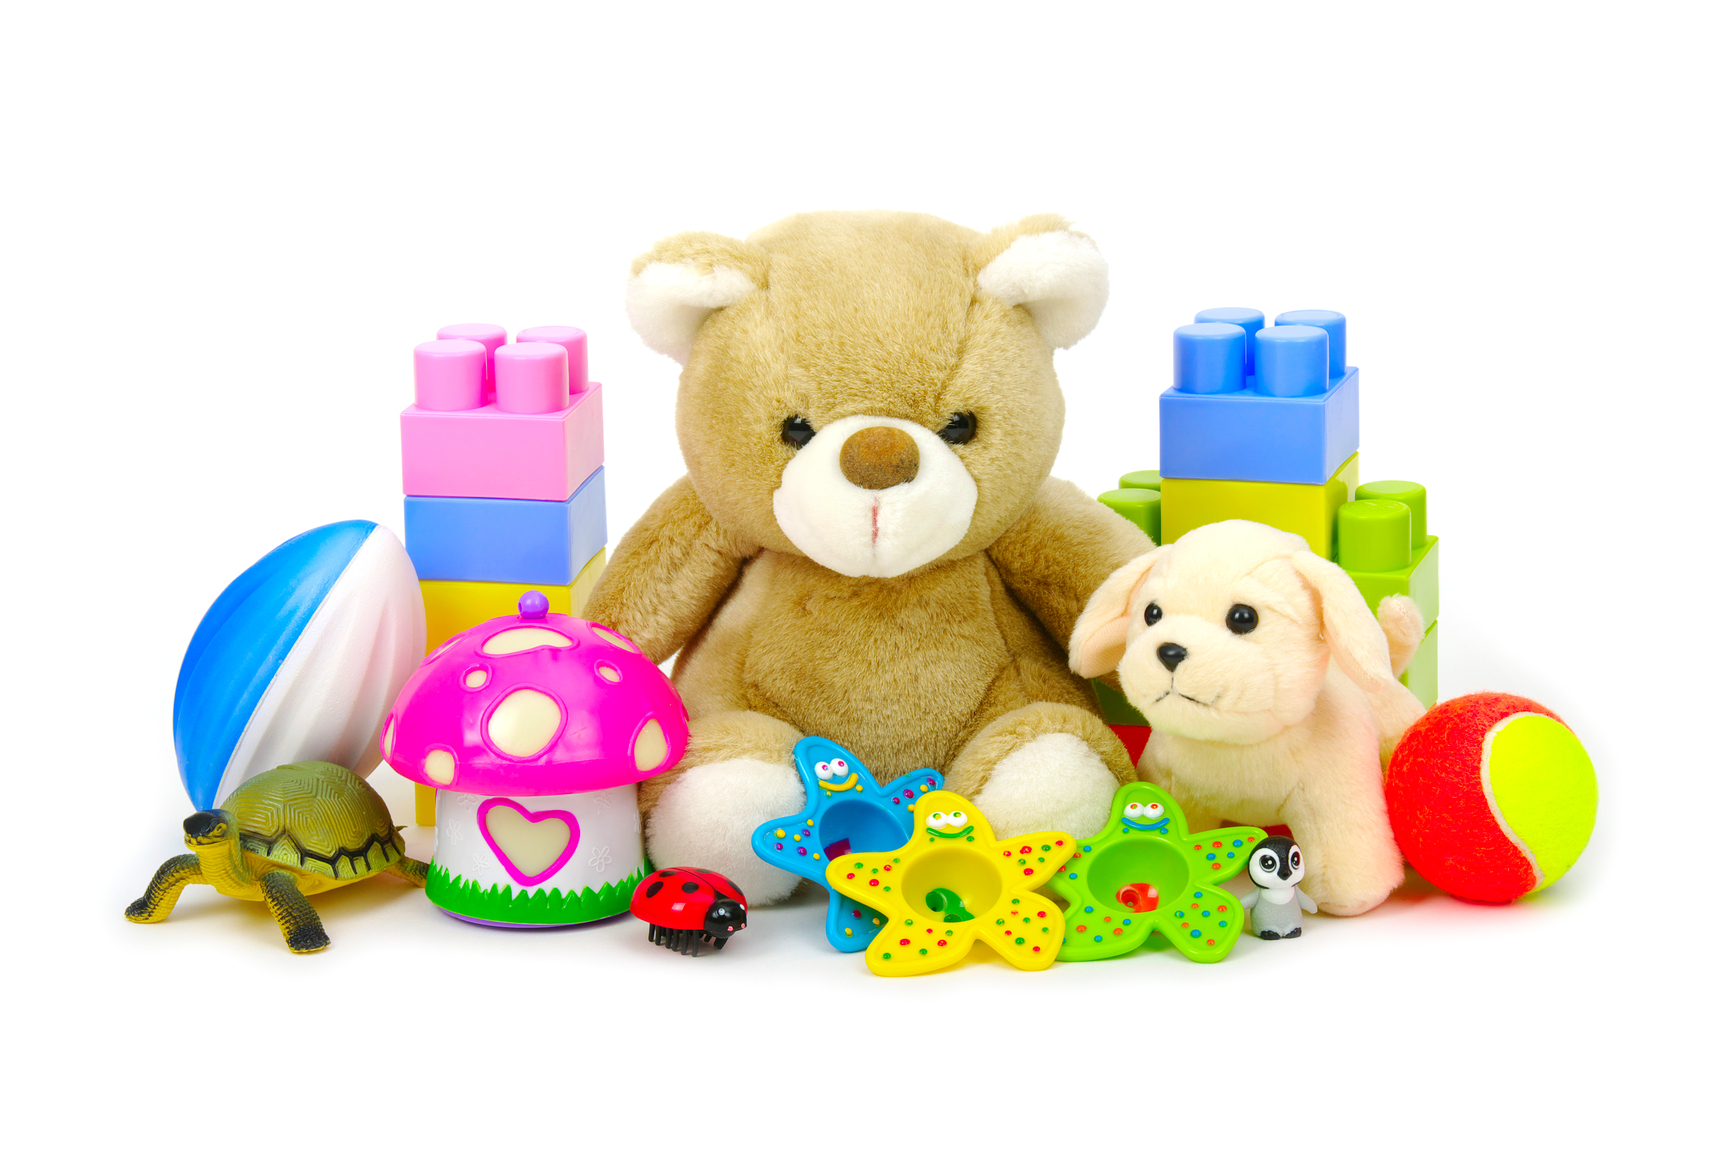 top-10-best-selling-toys-on-amazon-for-christmas-2013-benchmark